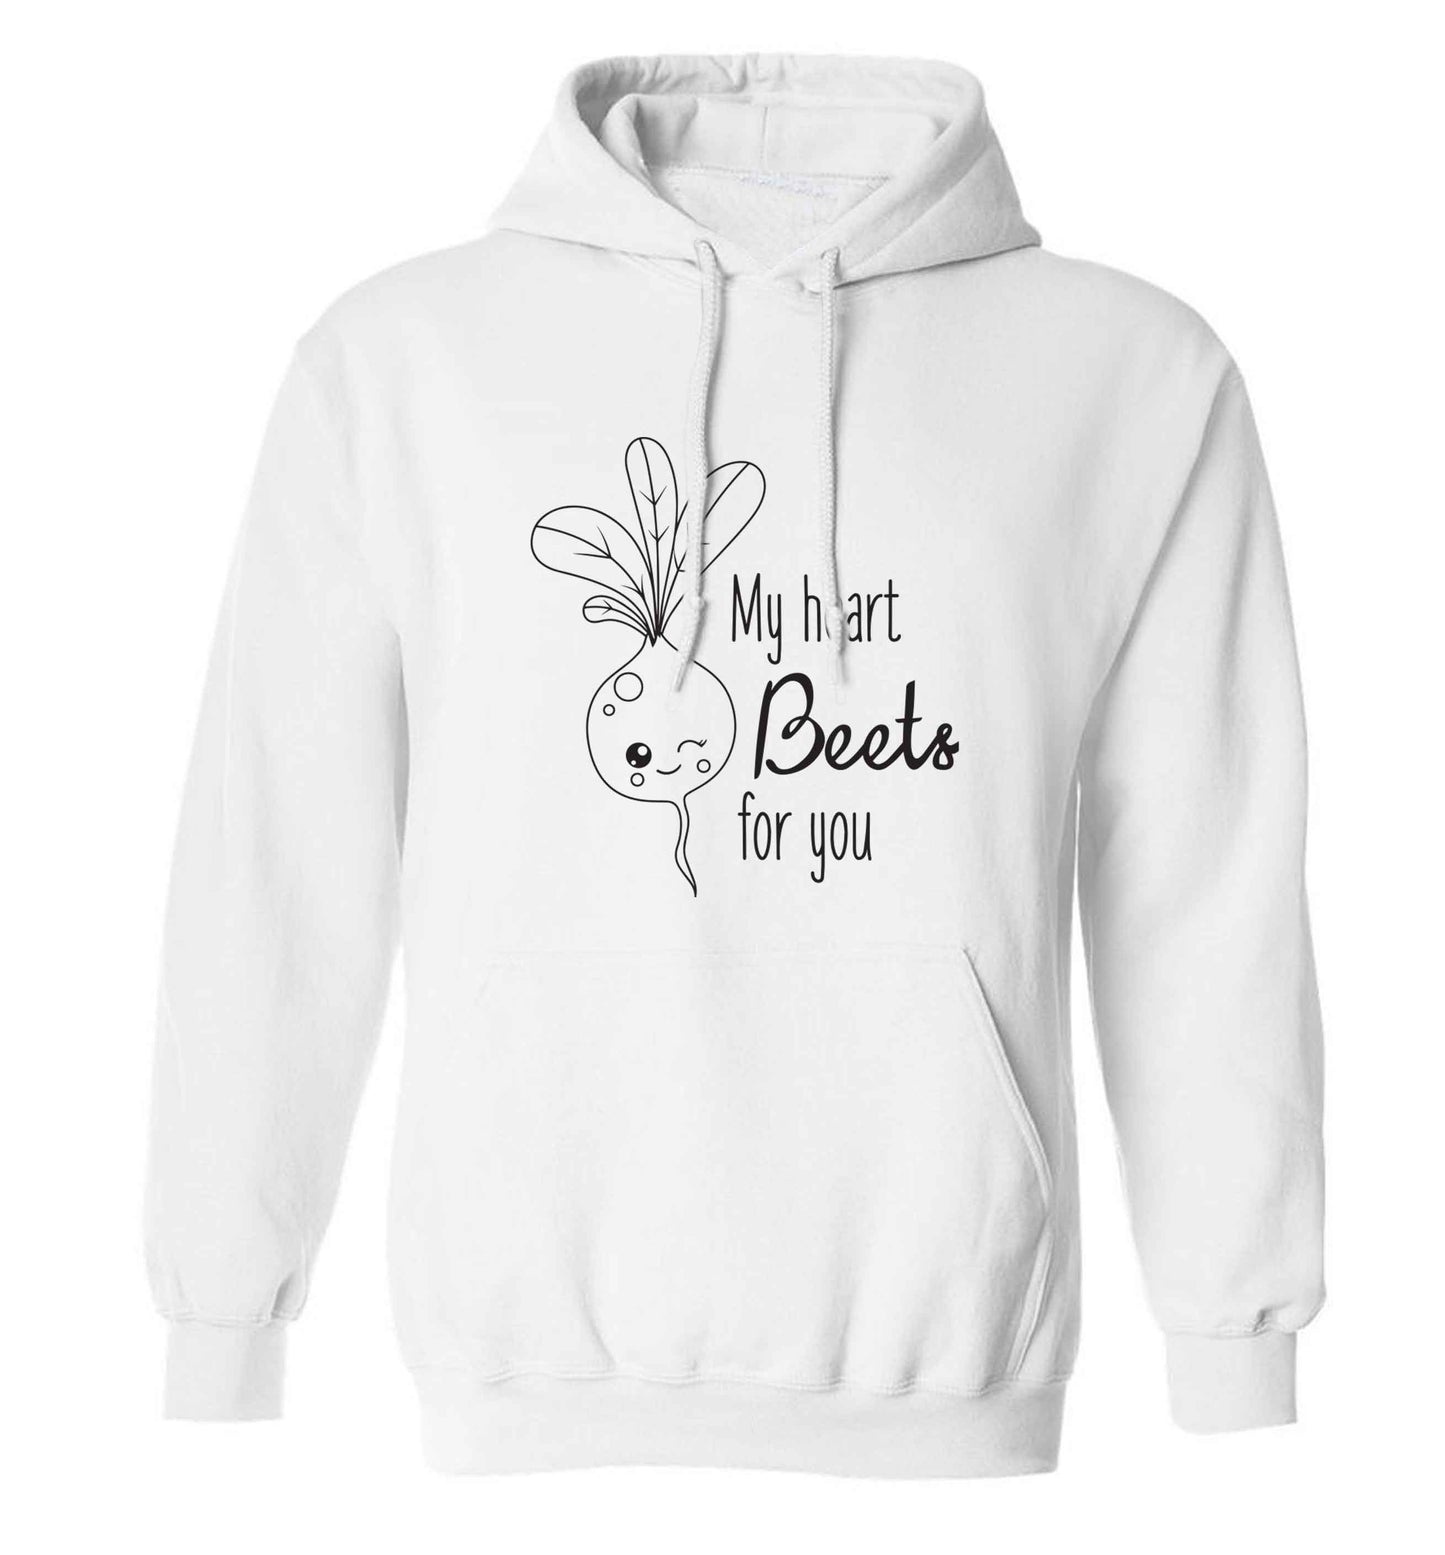 My heart beets for you adults unisex white hoodie 2XL